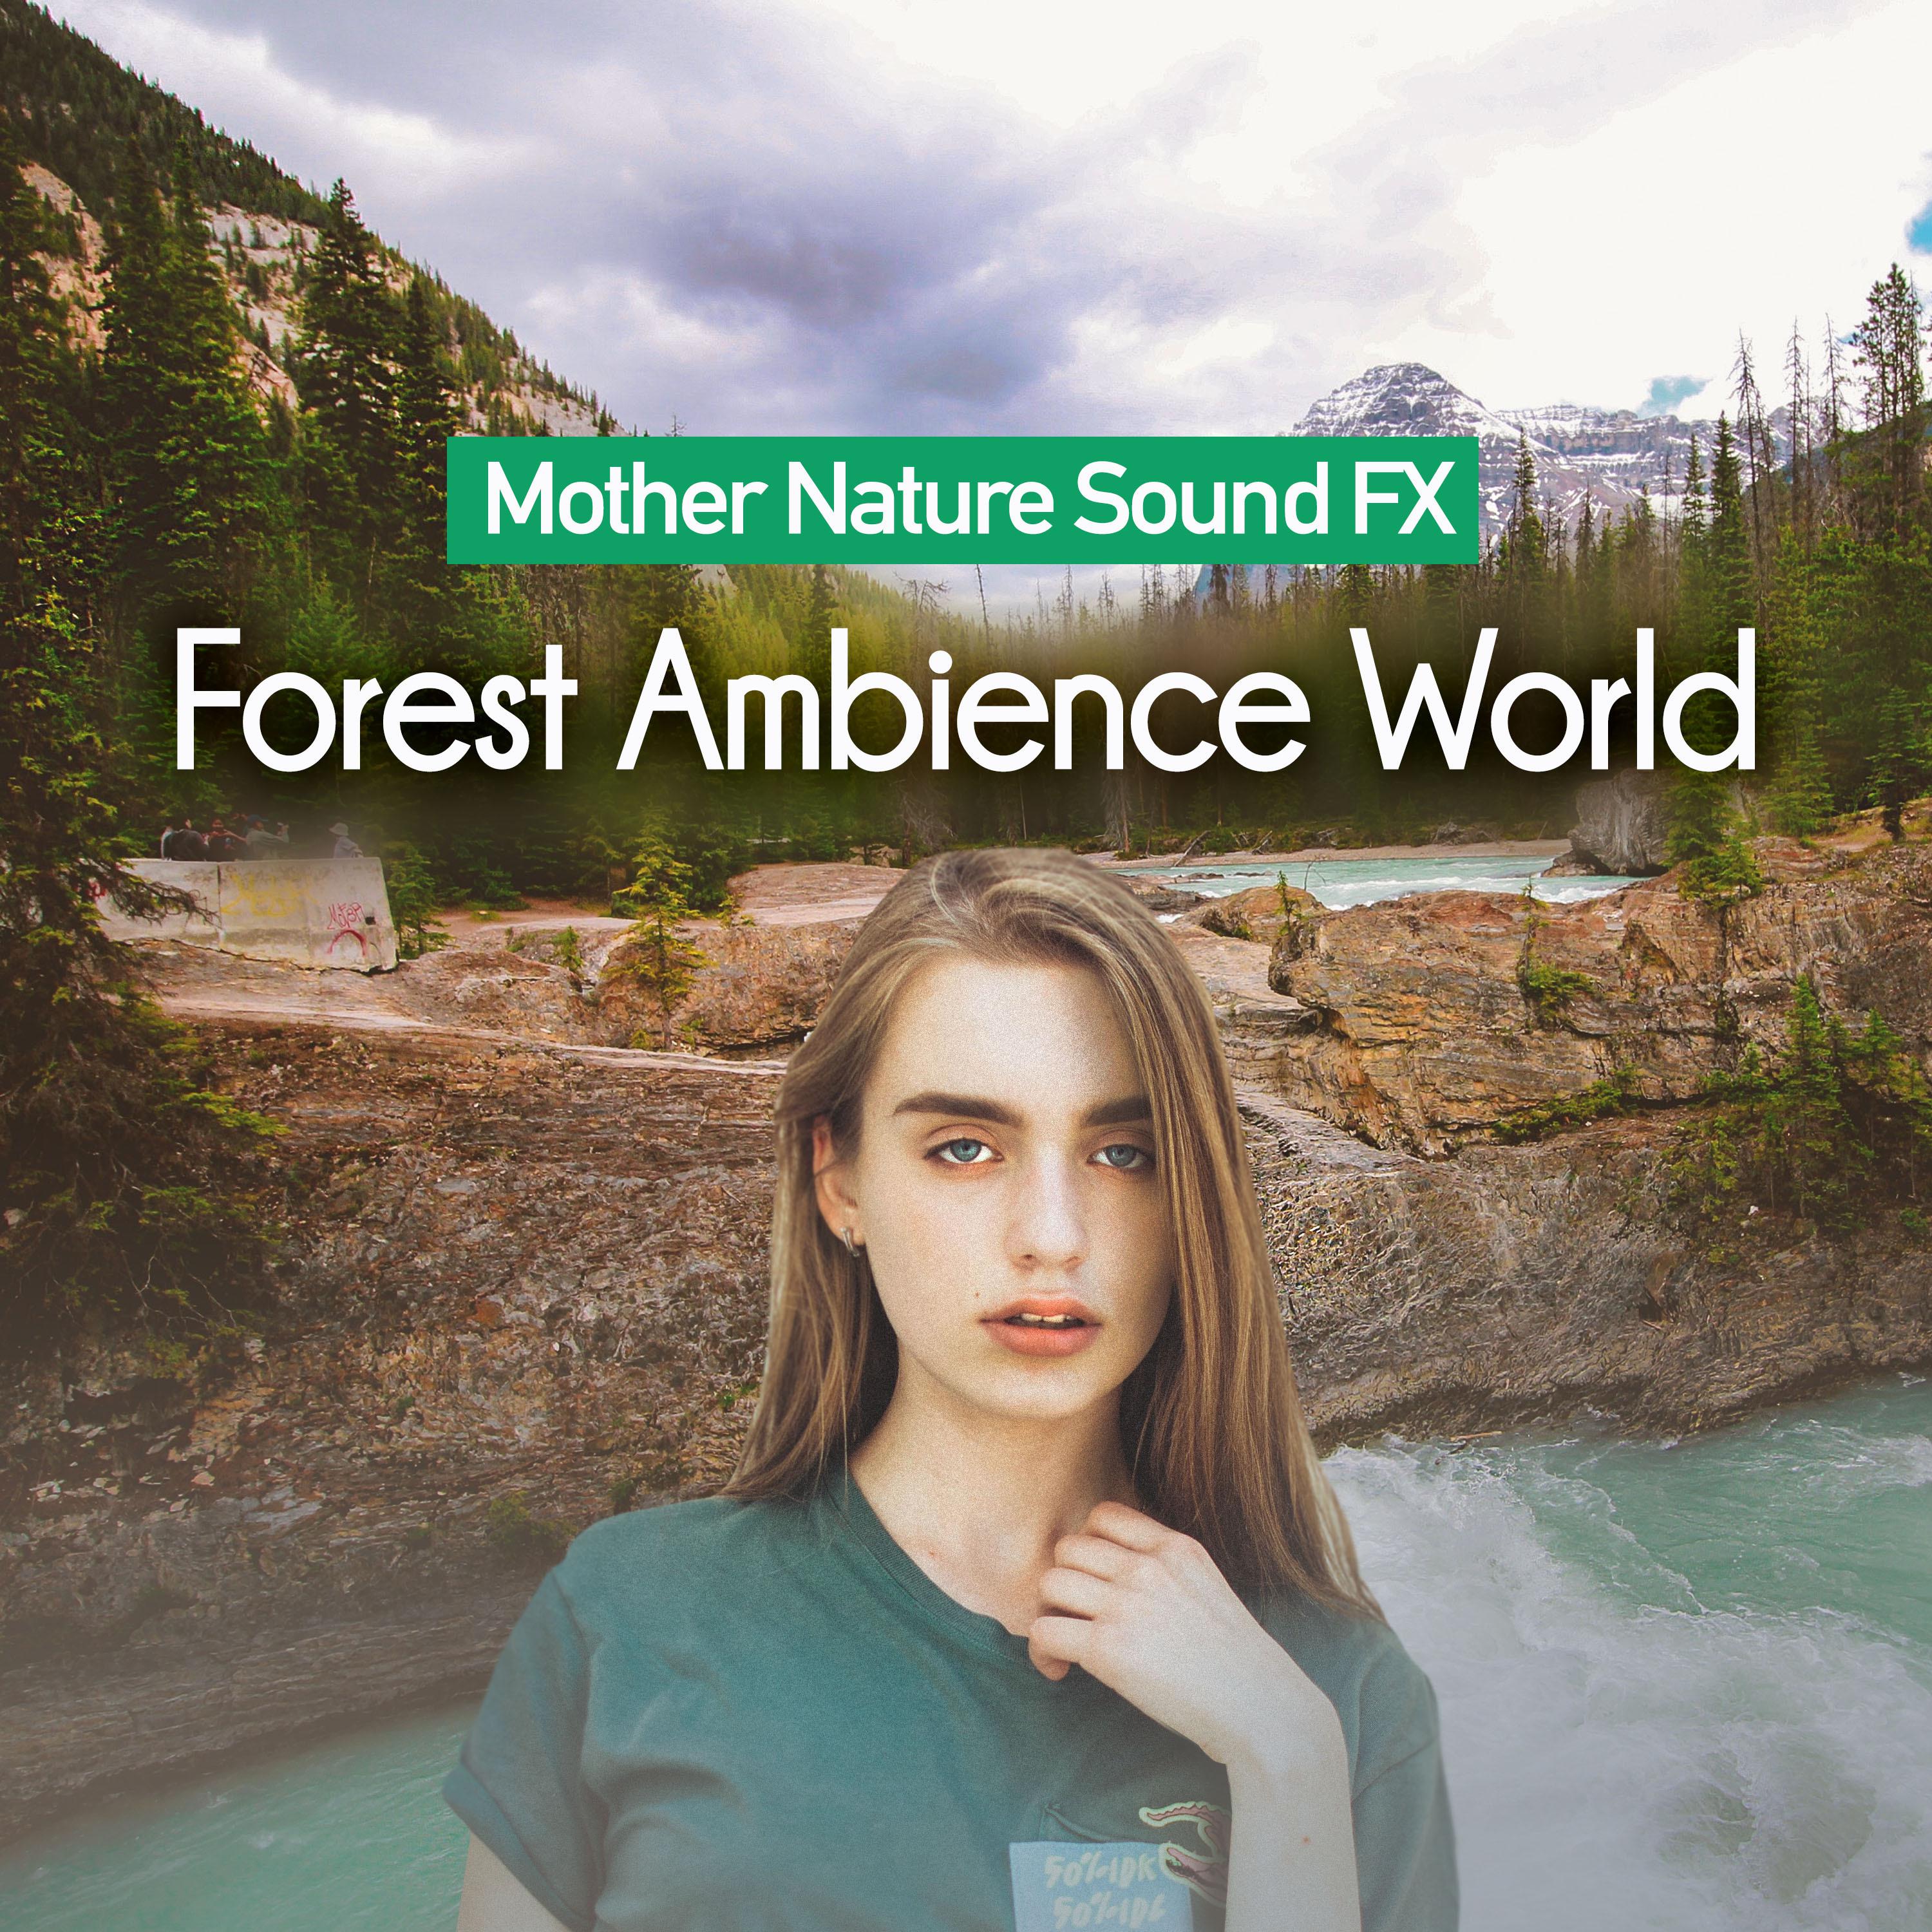 Forest Ambience World